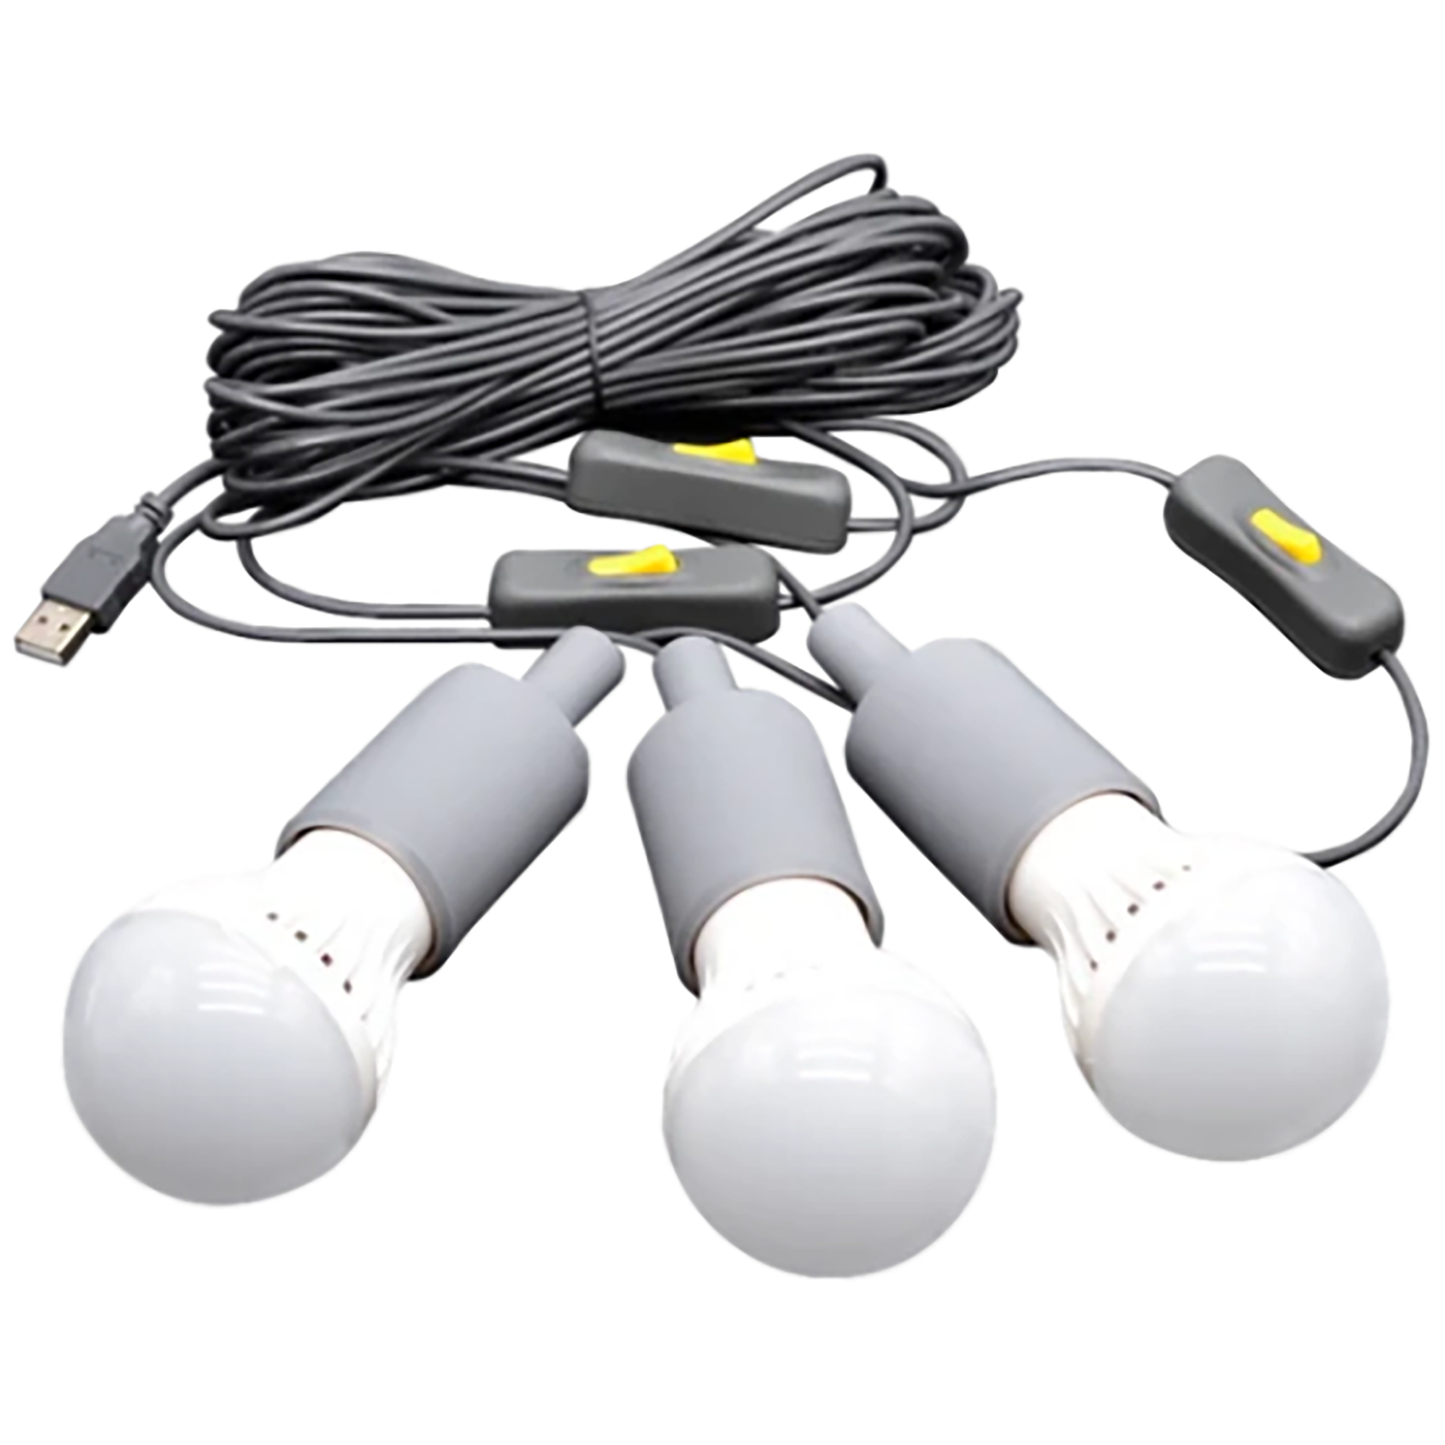 3 LED Lights Accesory - 3 LED Bulb String Lights with 15' Cables and Individual Switches.